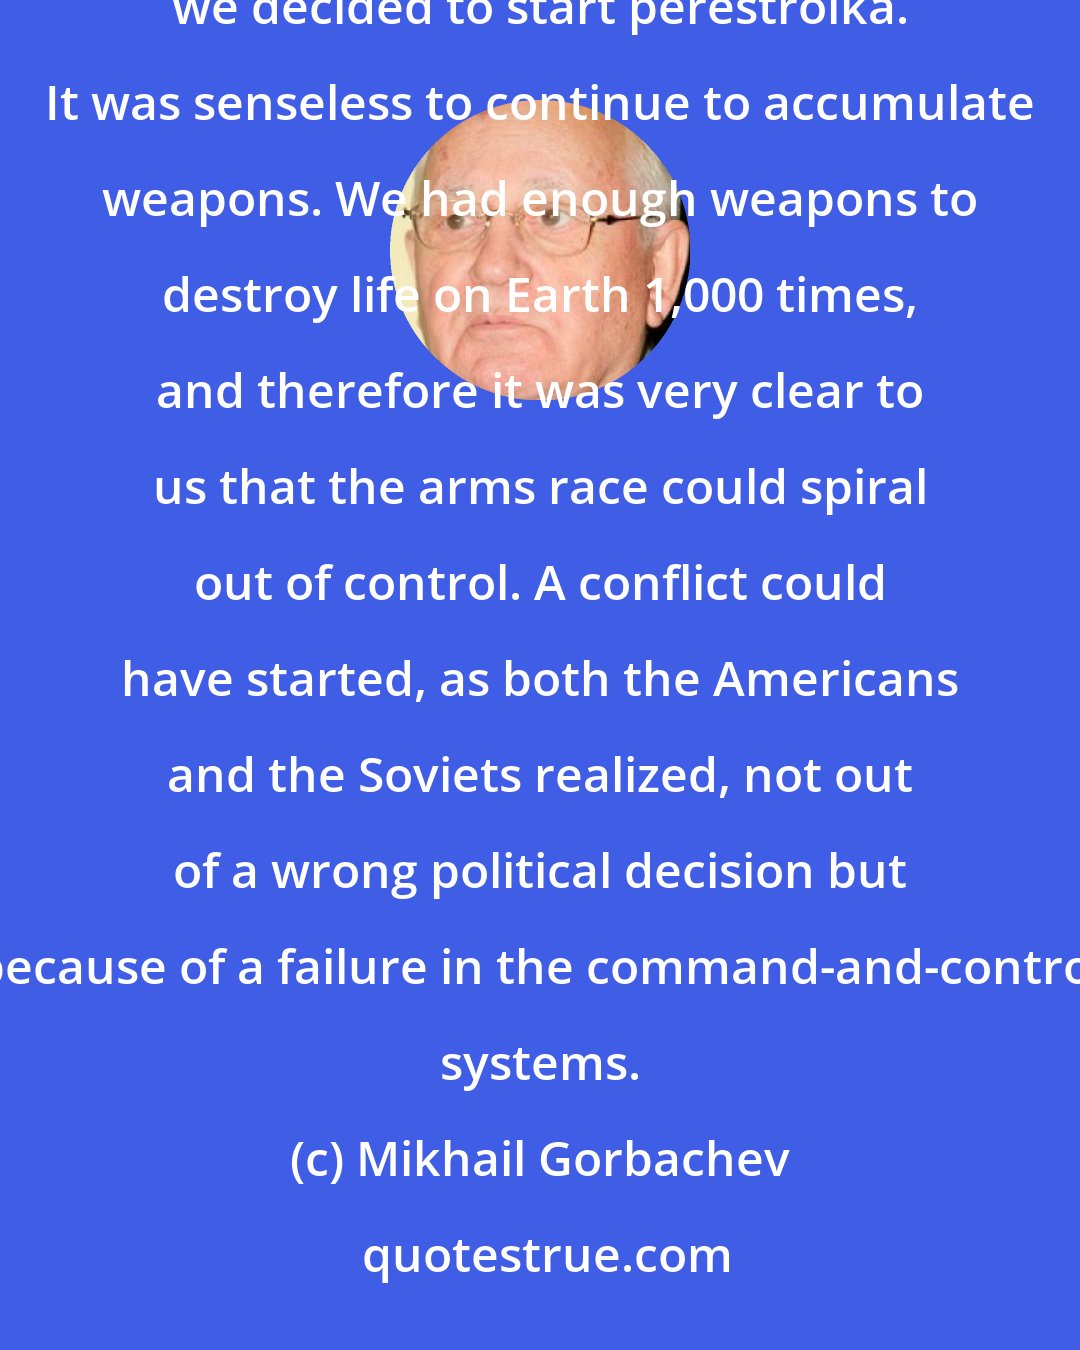 Mikhail Gorbachev: We could still have continued the arms race, but the arms race was pointless, and it was another reason we decided to start perestroika. It was senseless to continue to accumulate weapons. We had enough weapons to destroy life on Earth 1,000 times, and therefore it was very clear to us that the arms race could spiral out of control. A conflict could have started, as both the Americans and the Soviets realized, not out of a wrong political decision but because of a failure in the command-and-control systems.